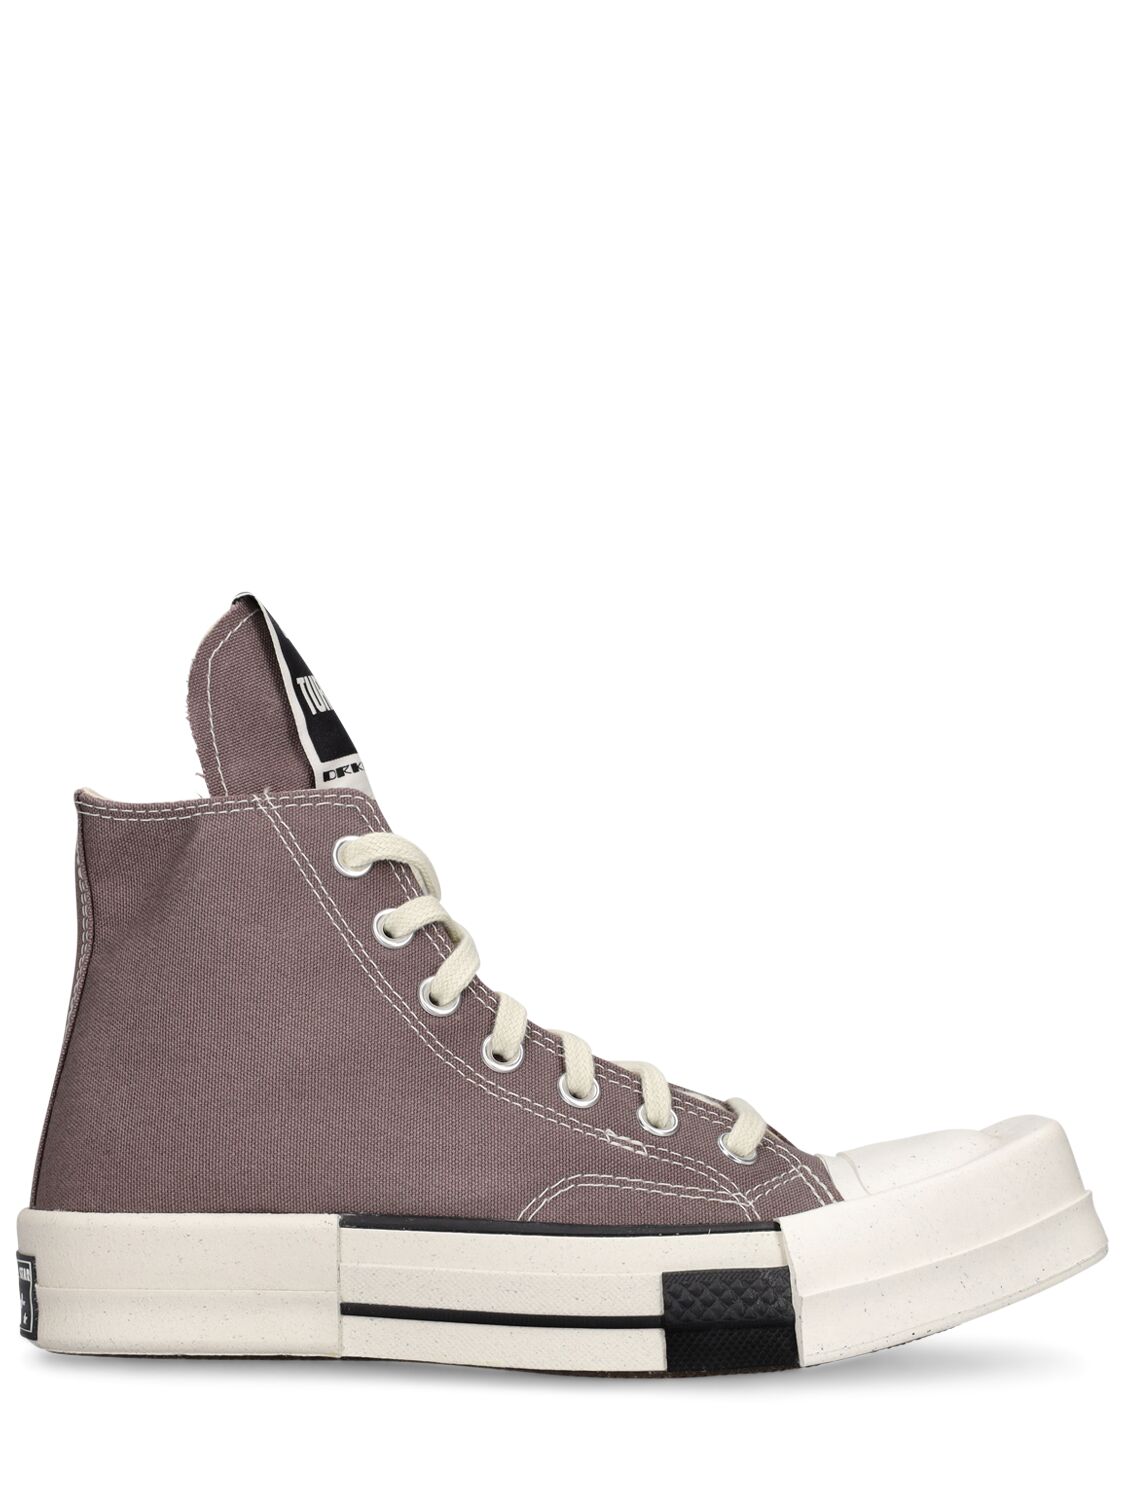 Drkshdw X Converse Turbodrk Laceless Hi Cotton Sneakers In Gray